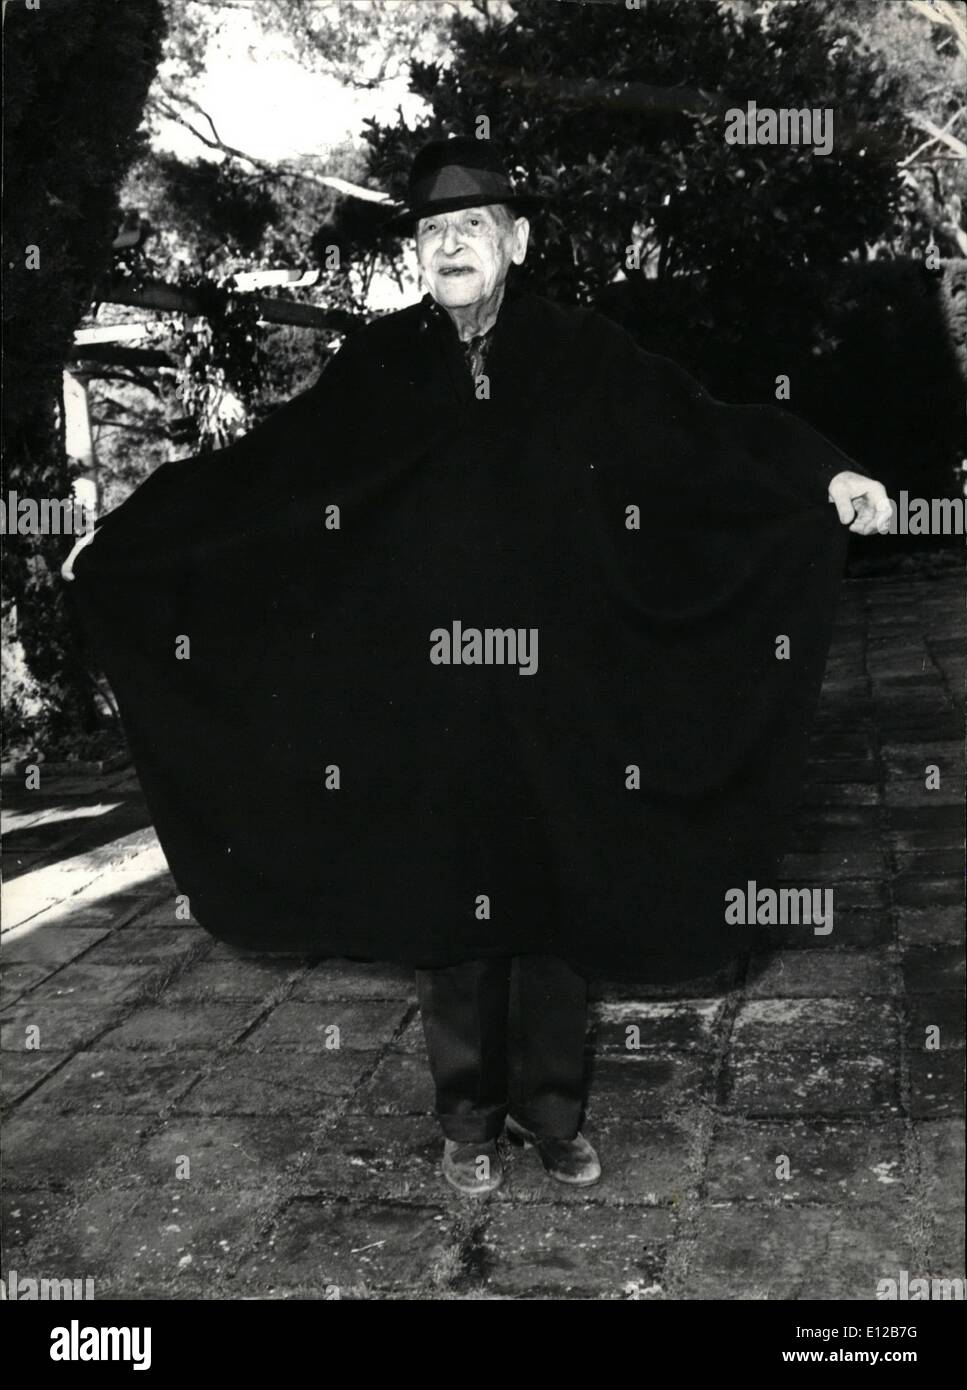 Dec. 09, 2011 - Somerset Maugham celebrates his 91st birthday: Somerset Maugham celebrated his 9ist birthday in his villa at Saint-Jean Ferrat (French Riviera) yesterday. Photo Shows Somerset Maugham wearing a black cape. Stock Photo